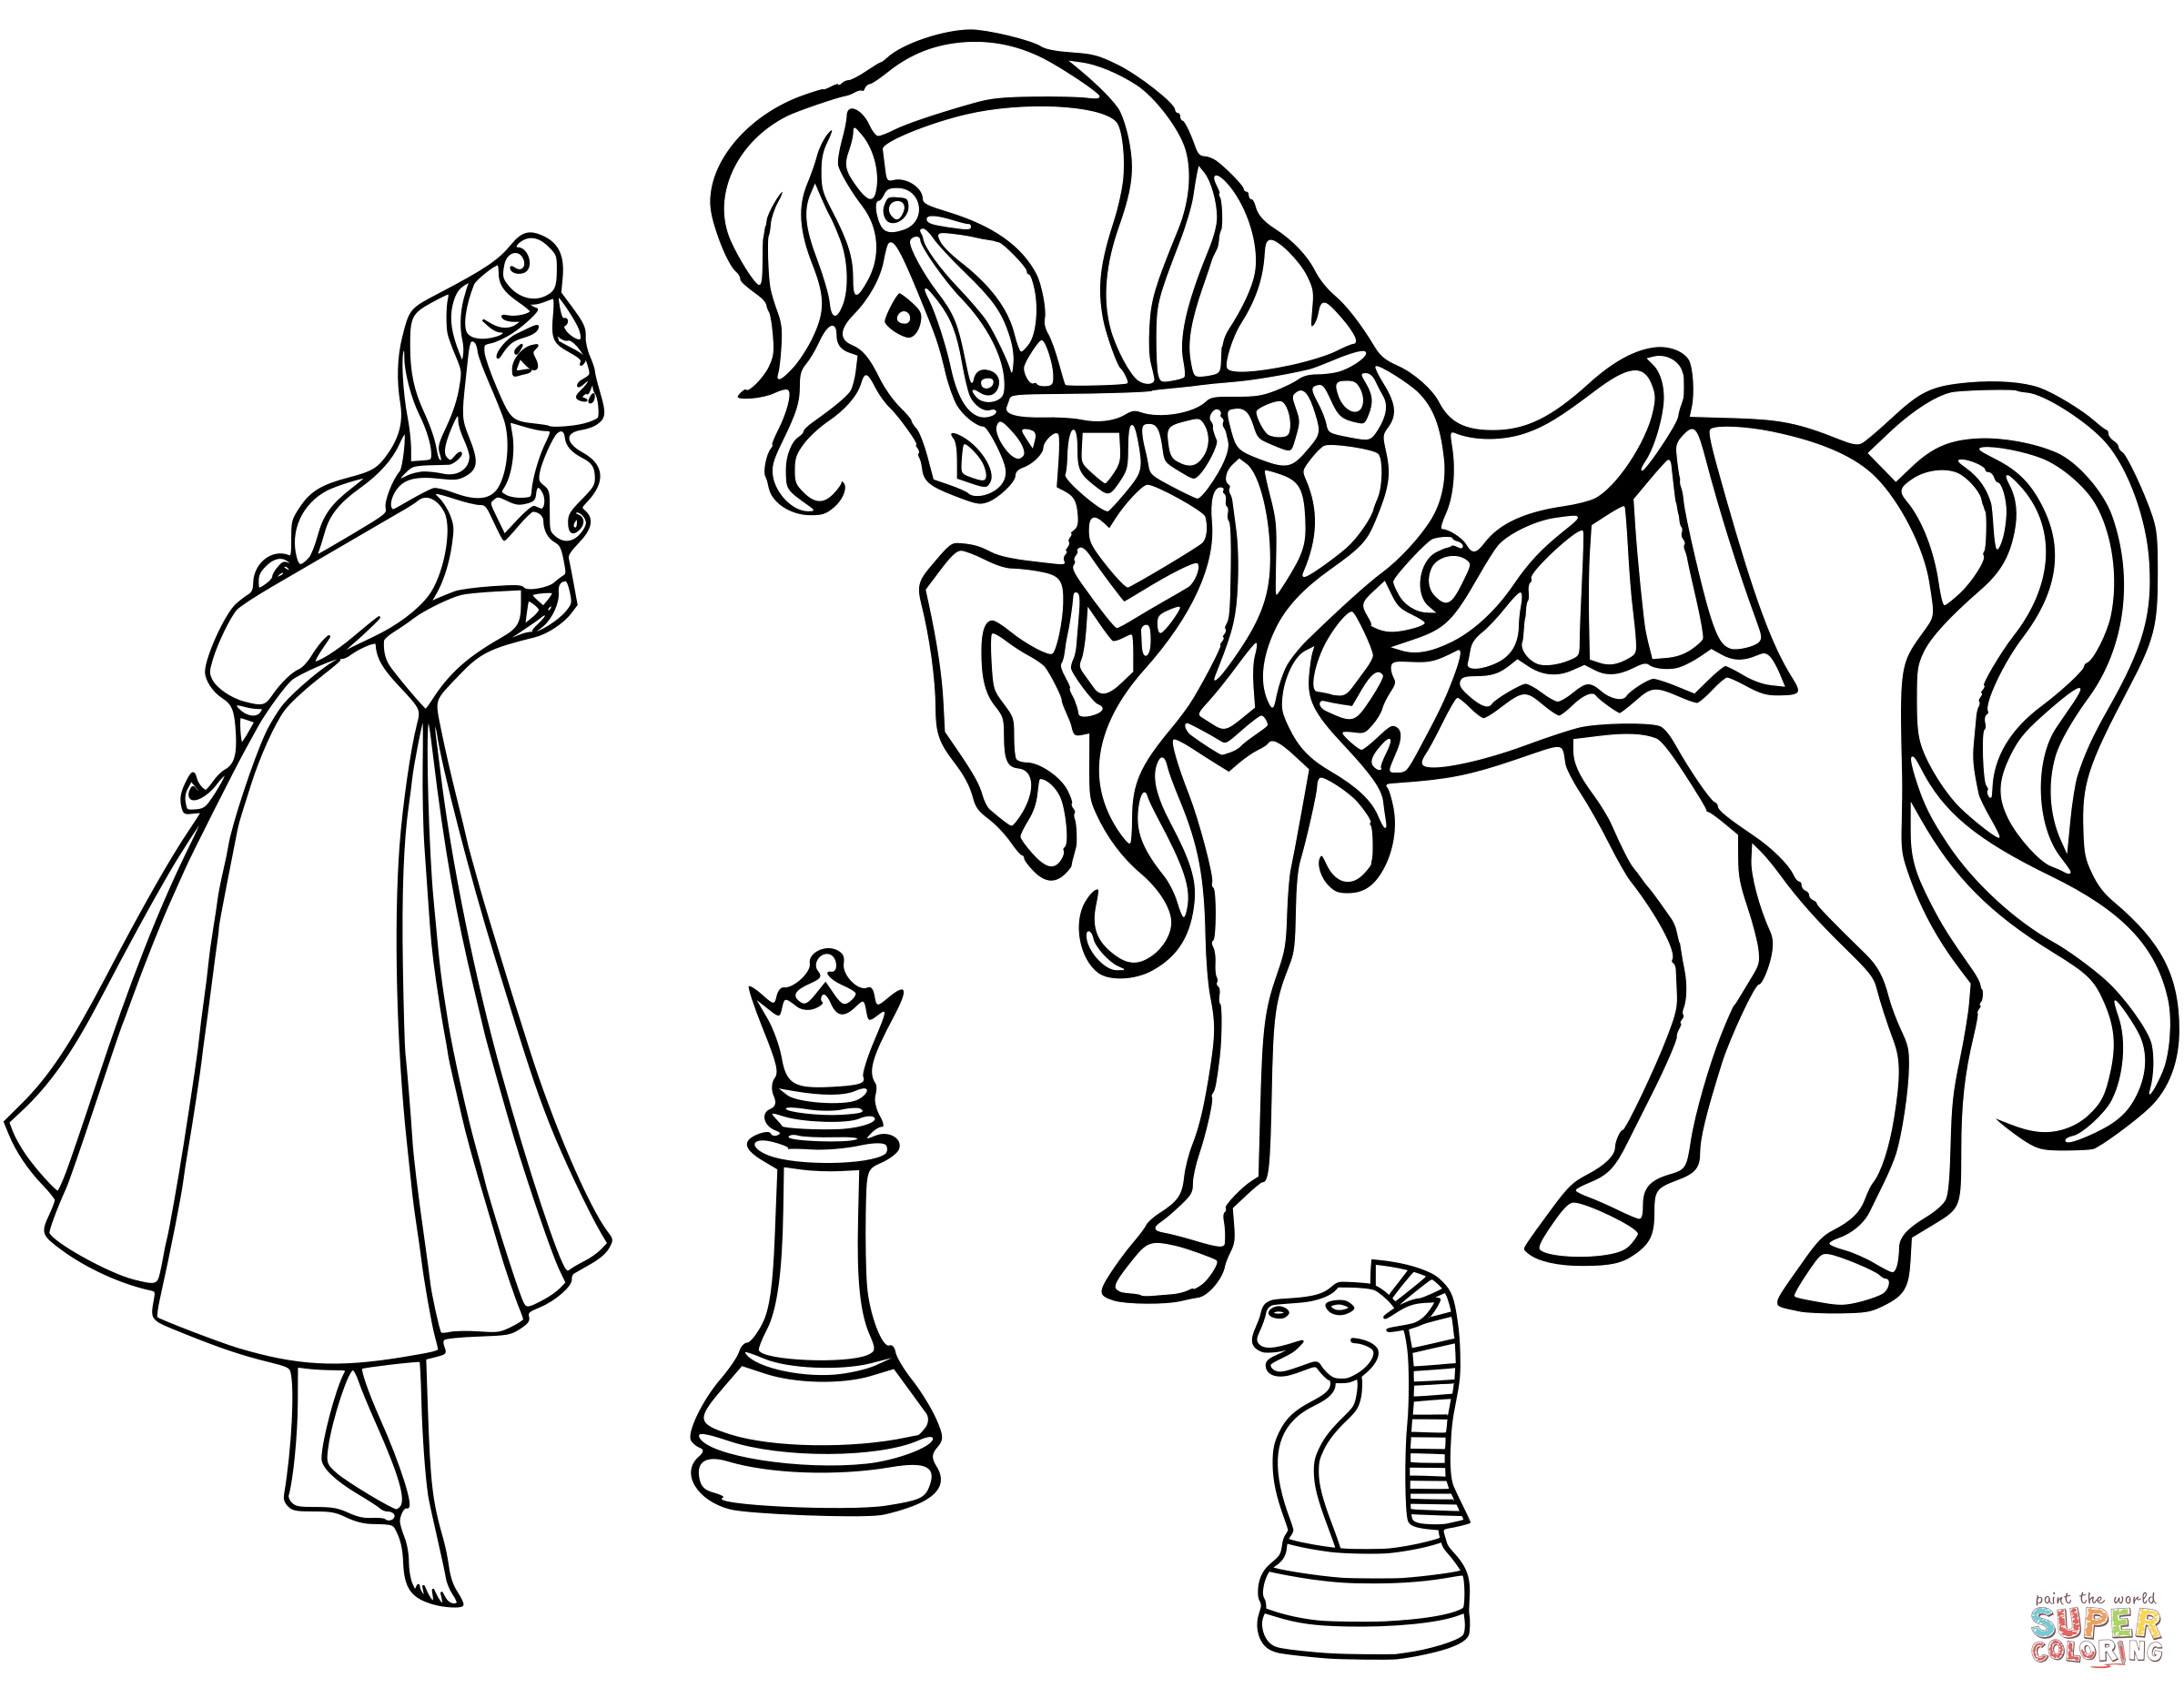 Dama and horse chess pieces coloring page free printable coloring pages